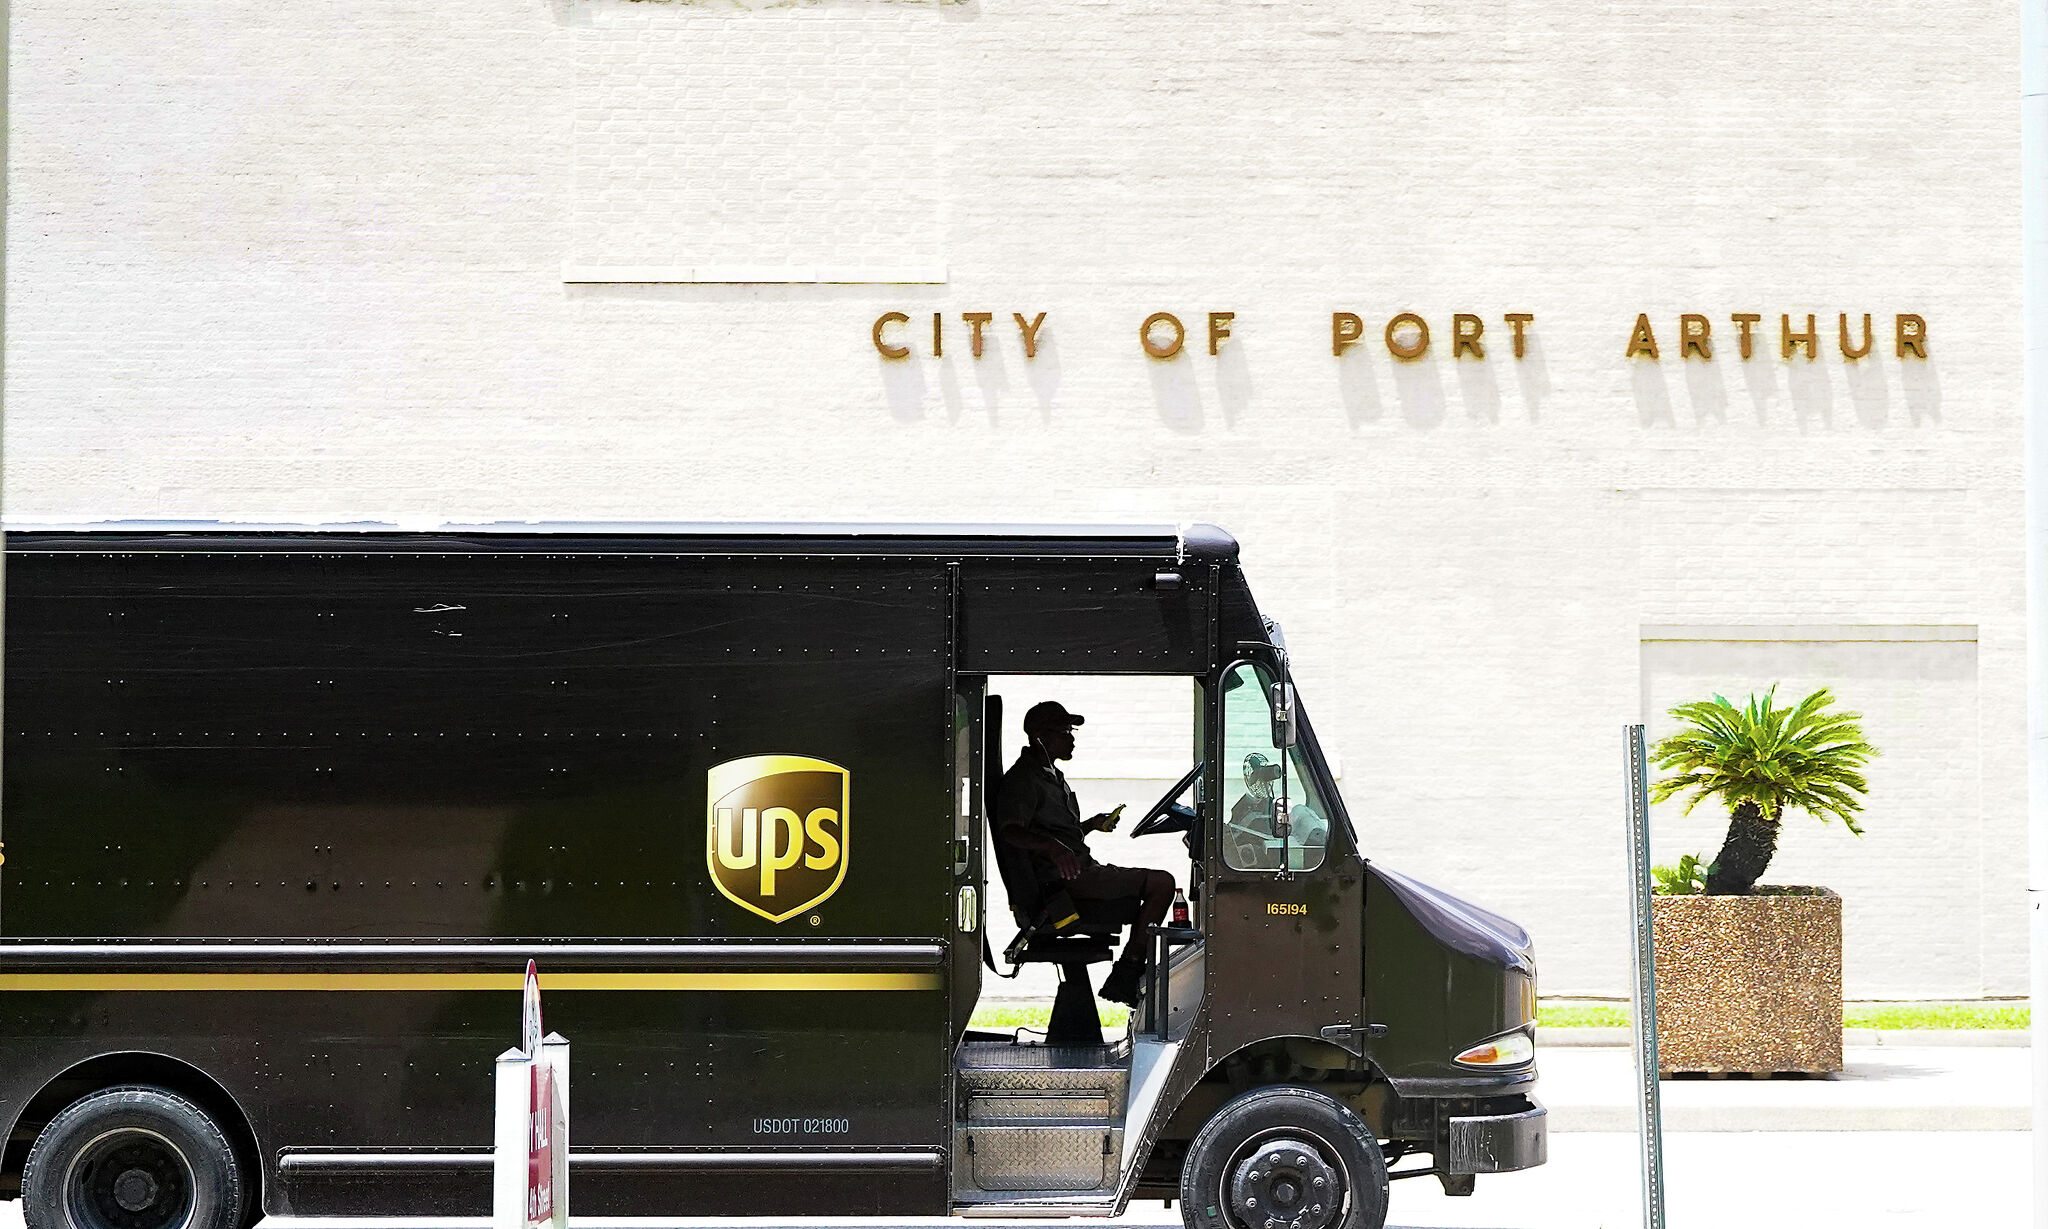 ups delivery truck